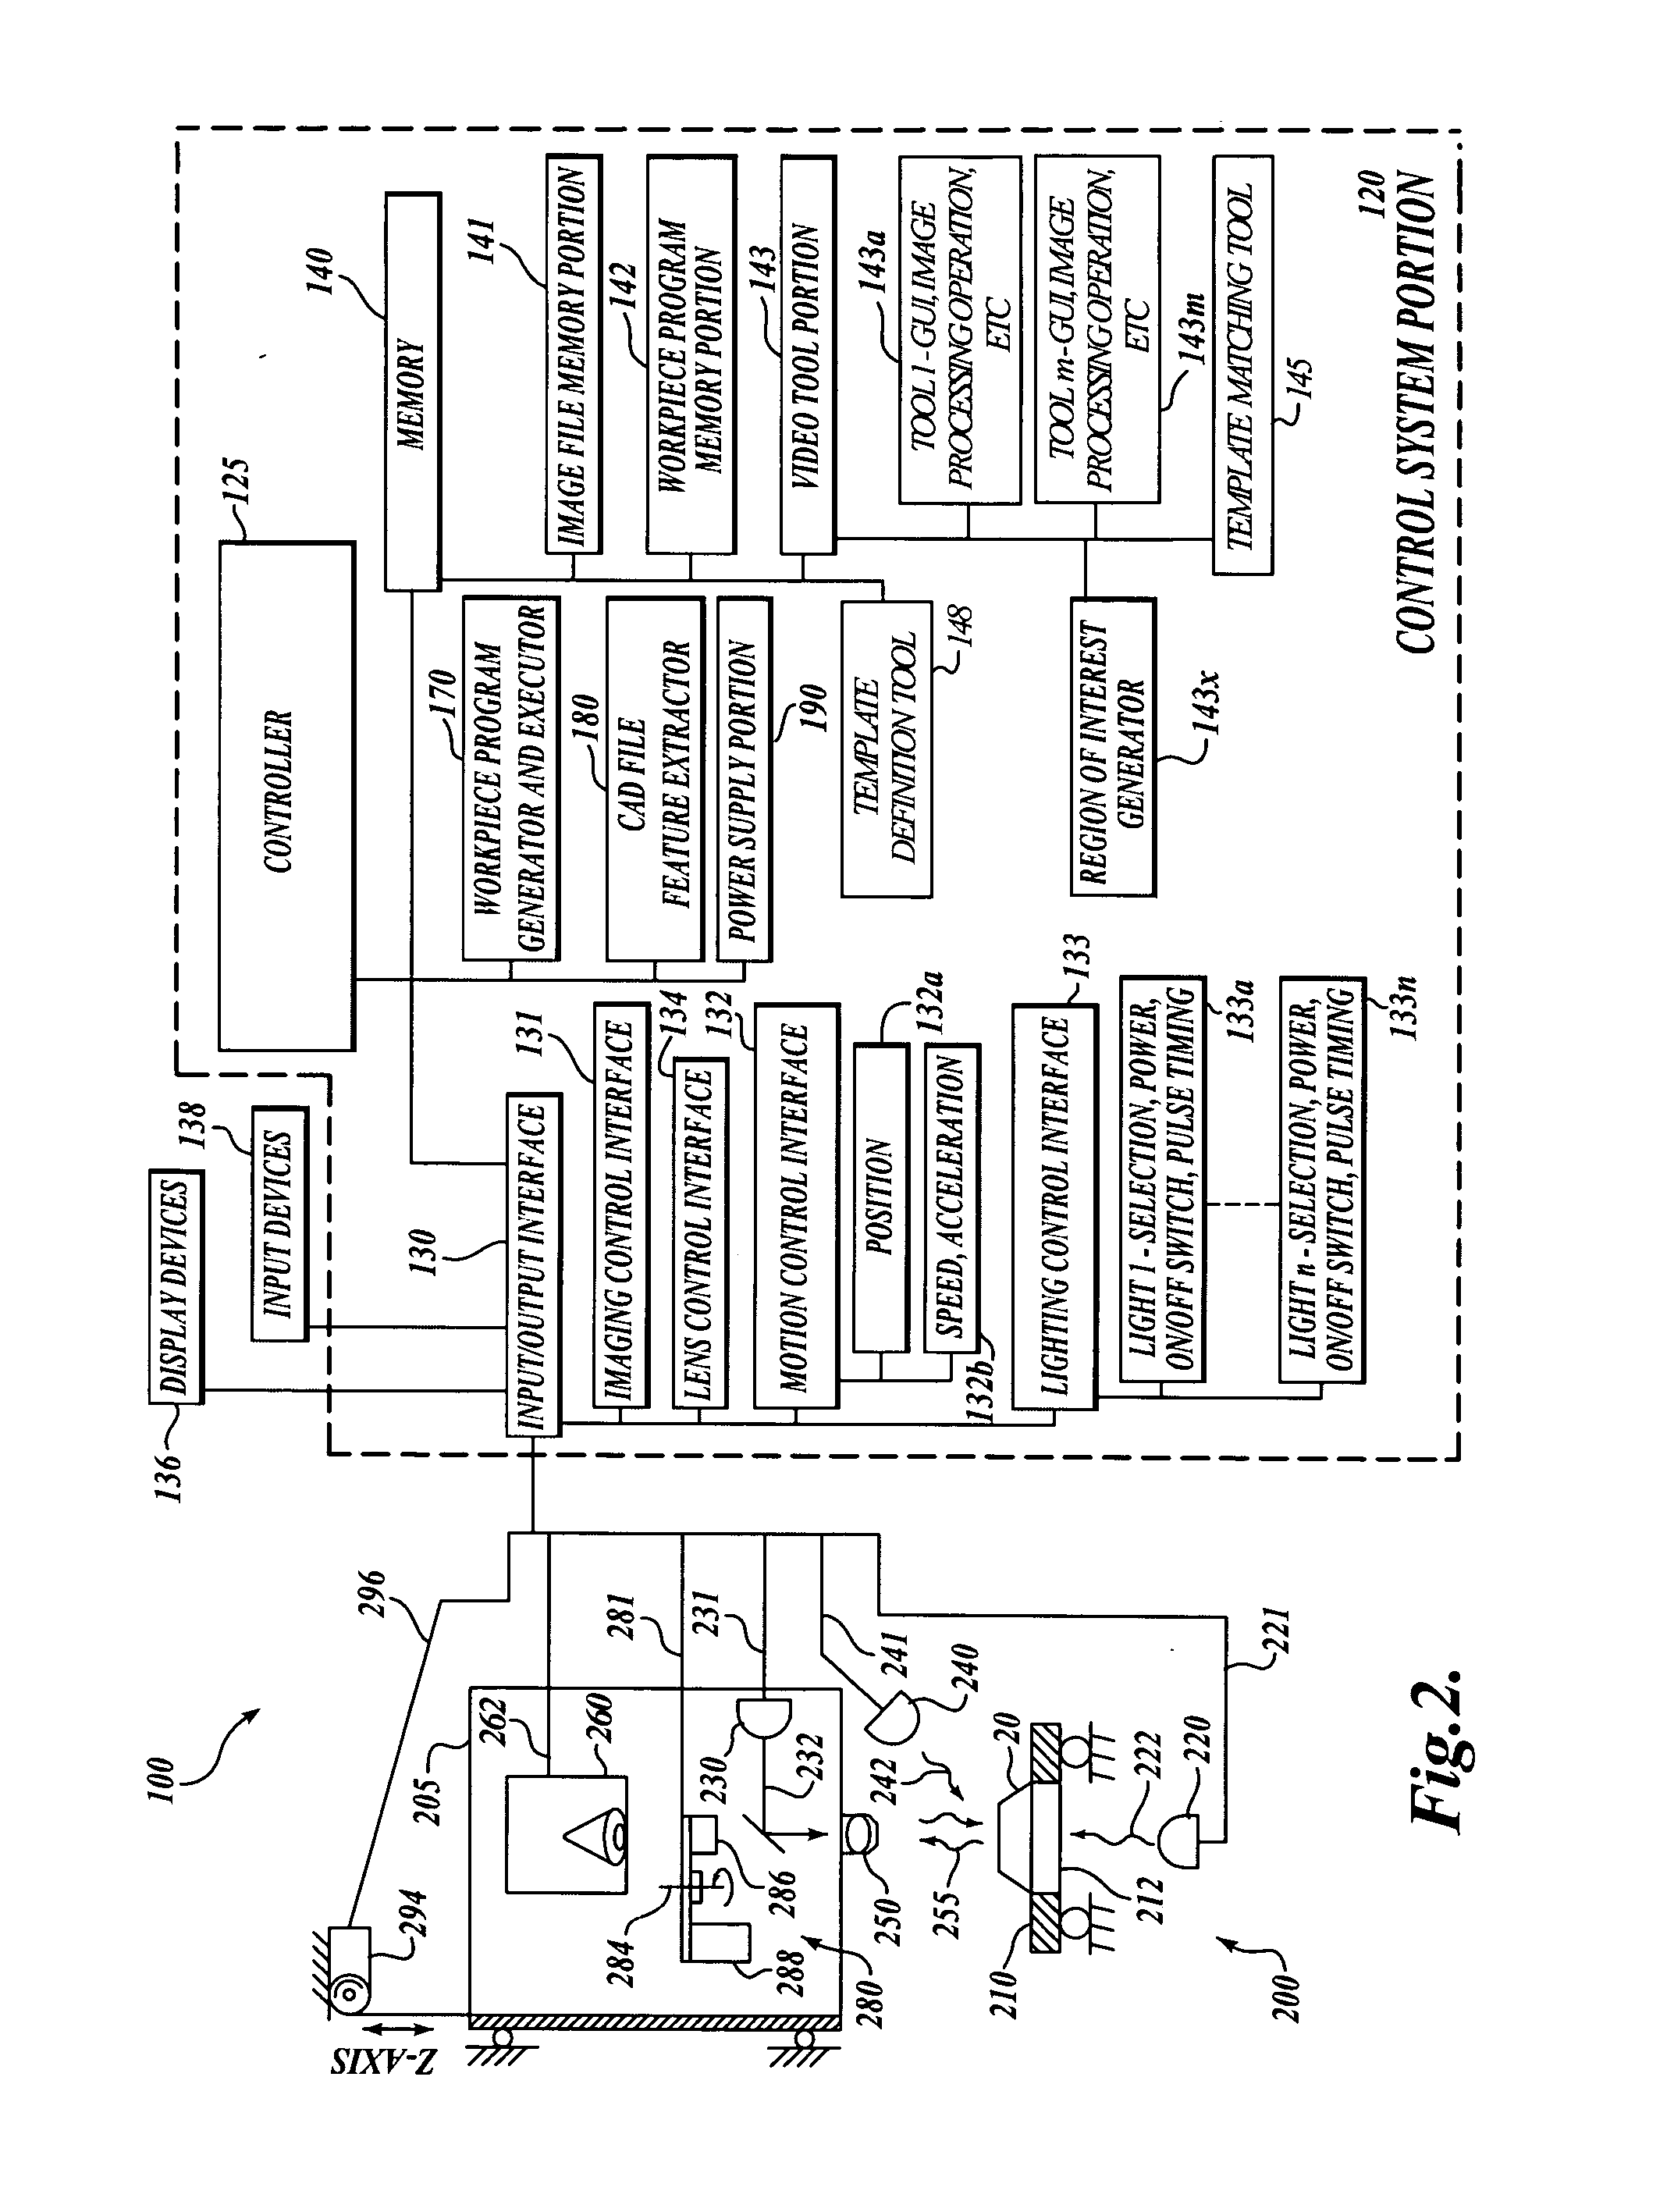 System and method for fast template matching by adaptive template decomposition